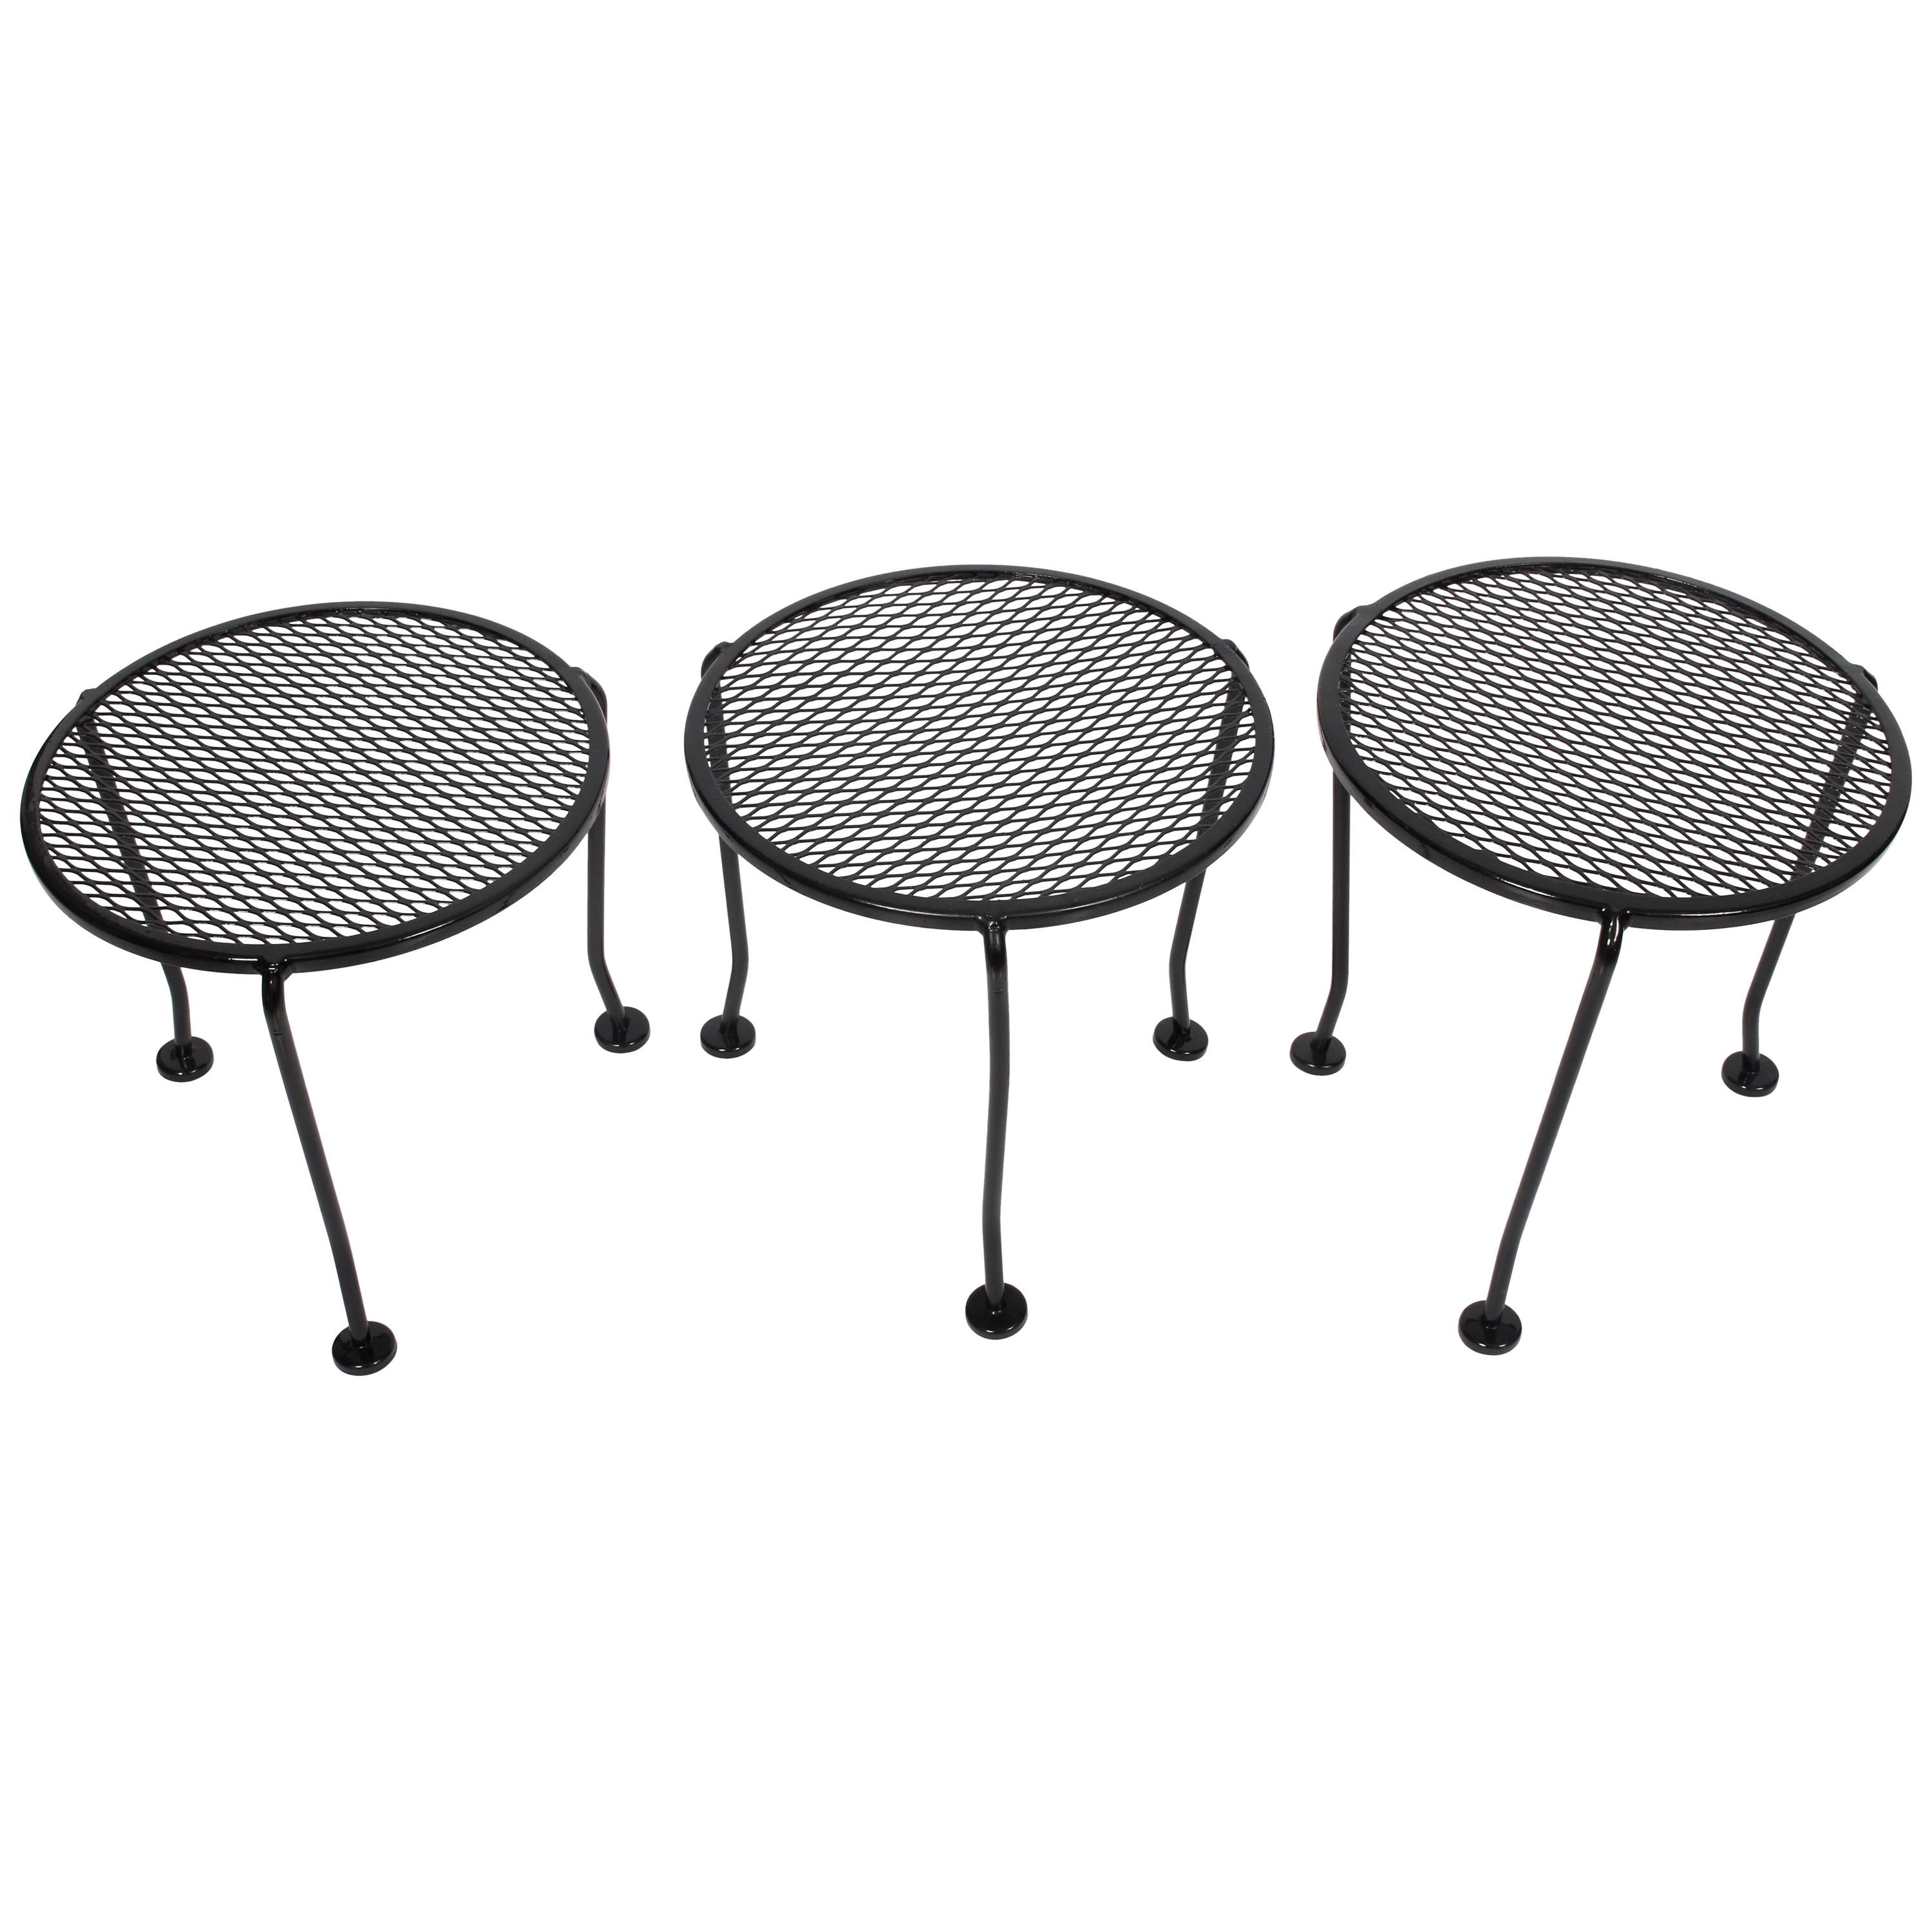 Set of 3 Russell Woodard Round Black "Sculptura" Stacking Tables